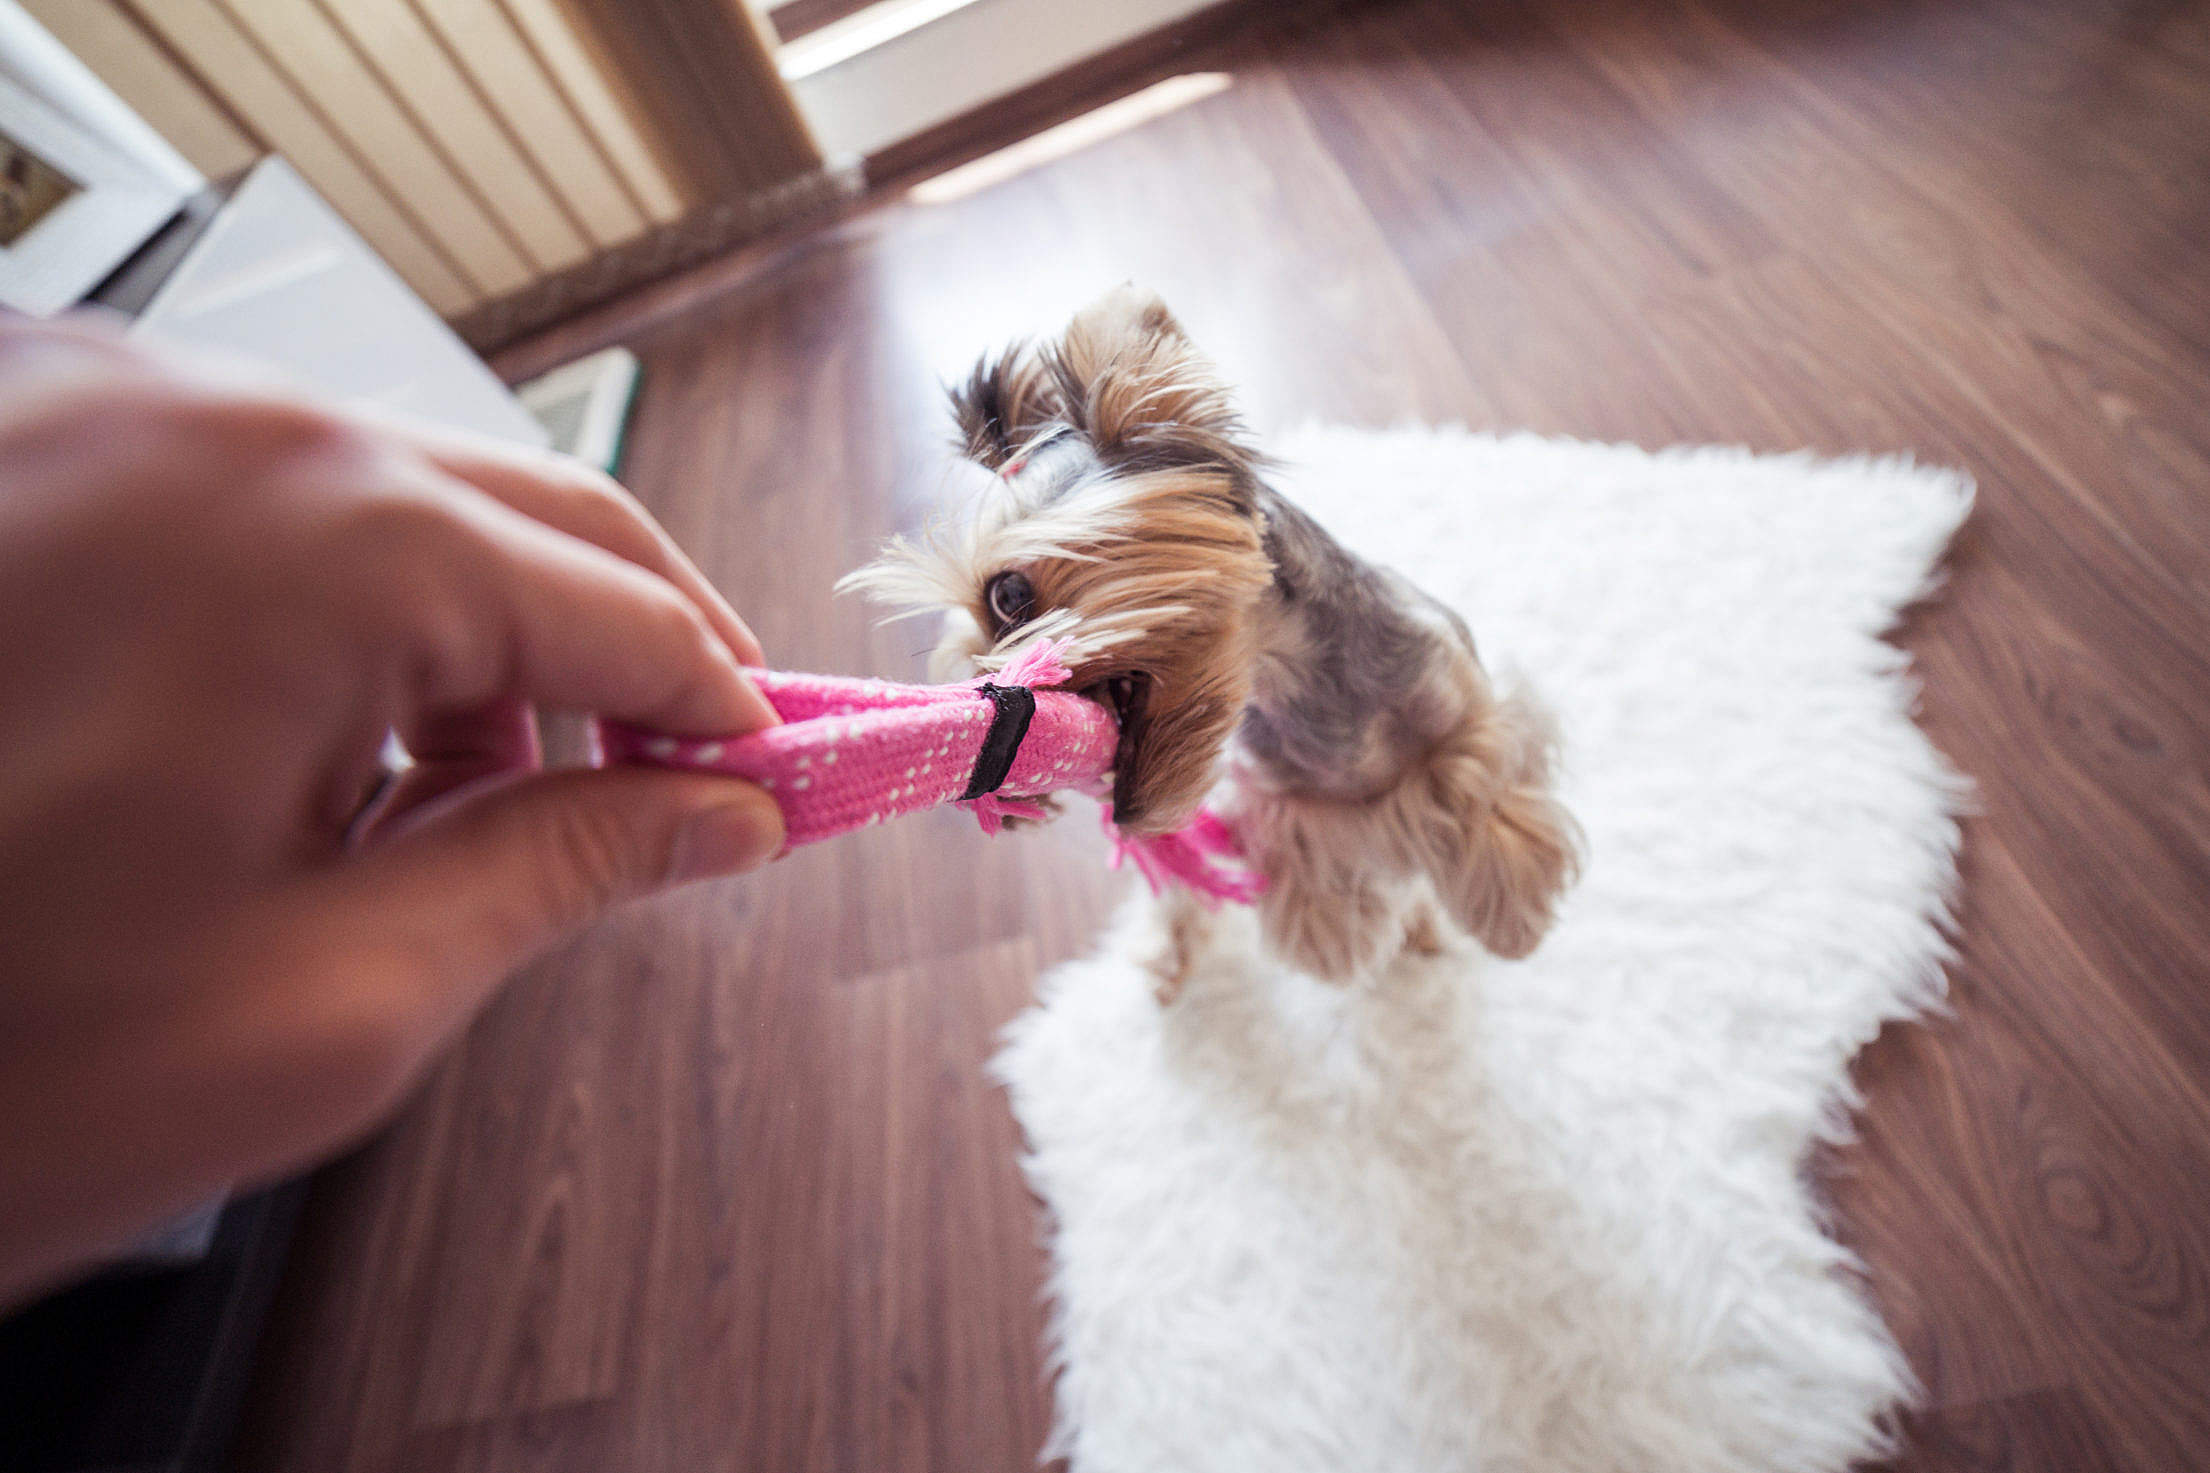 Funny Playing With Yorkie Dog at Home #3 Free Stock Photo